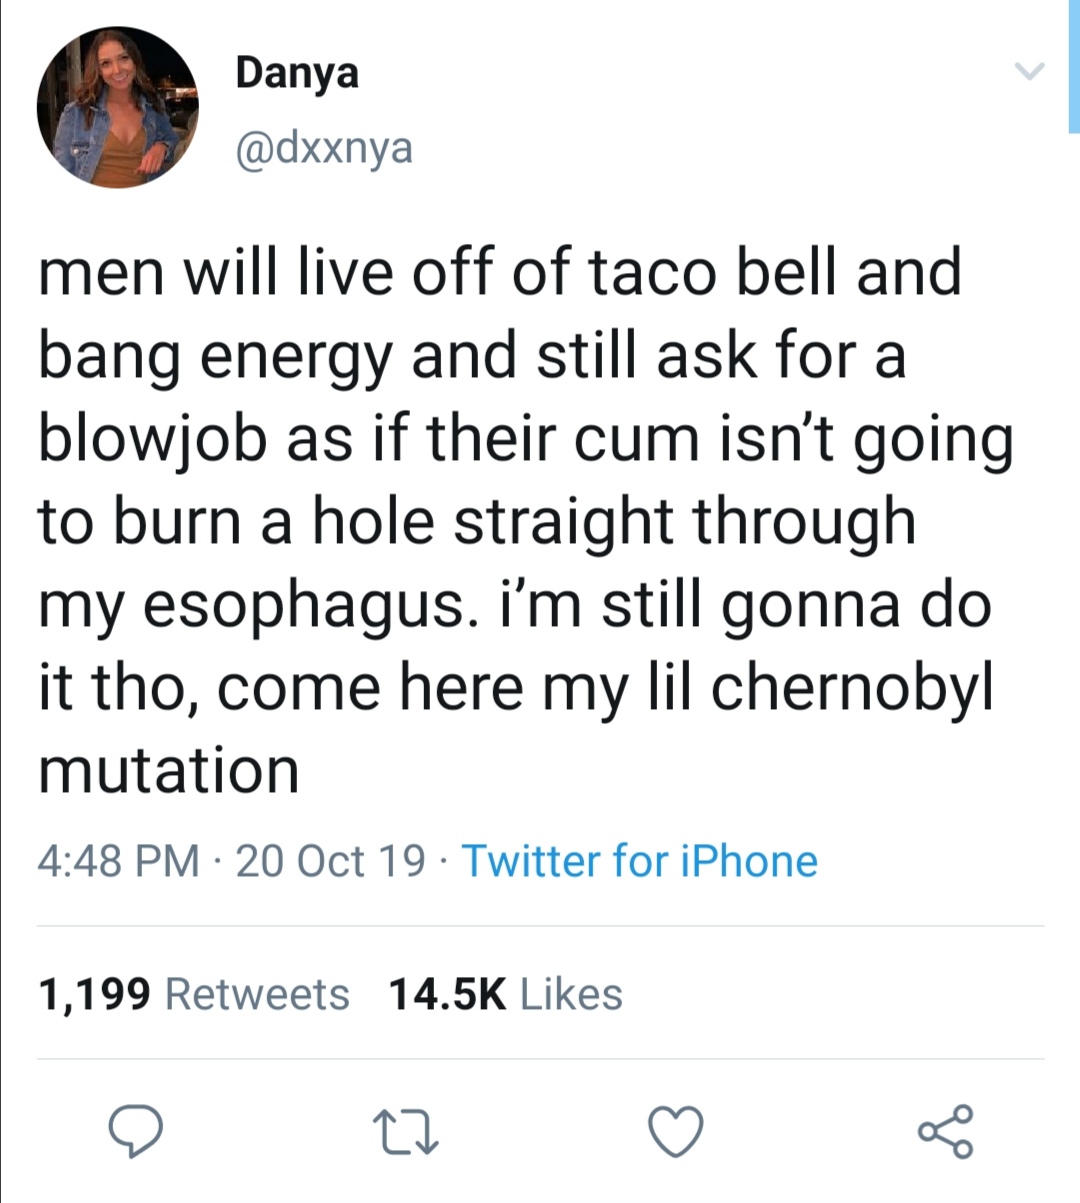 come here my little chernobyl mutation - Danya men will live off of taco bell and bang energy and still ask for a blowjob as if their cum isn't going to burn a hole straight through my esophagus. i'm still gonna do it tho, come here my lil chernobyl mutat